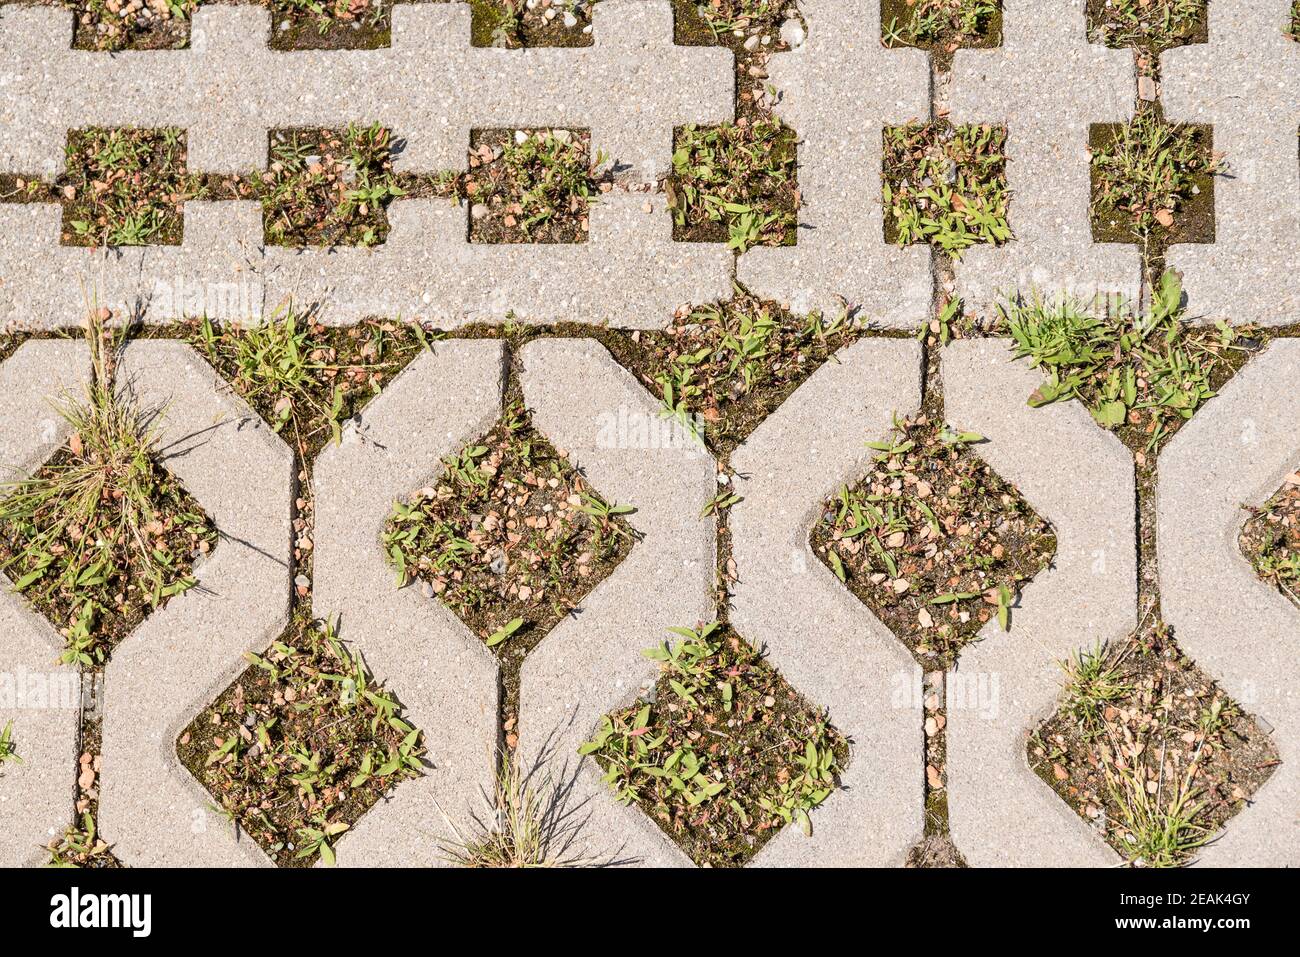 Parking area with lawn grating Stock Photo